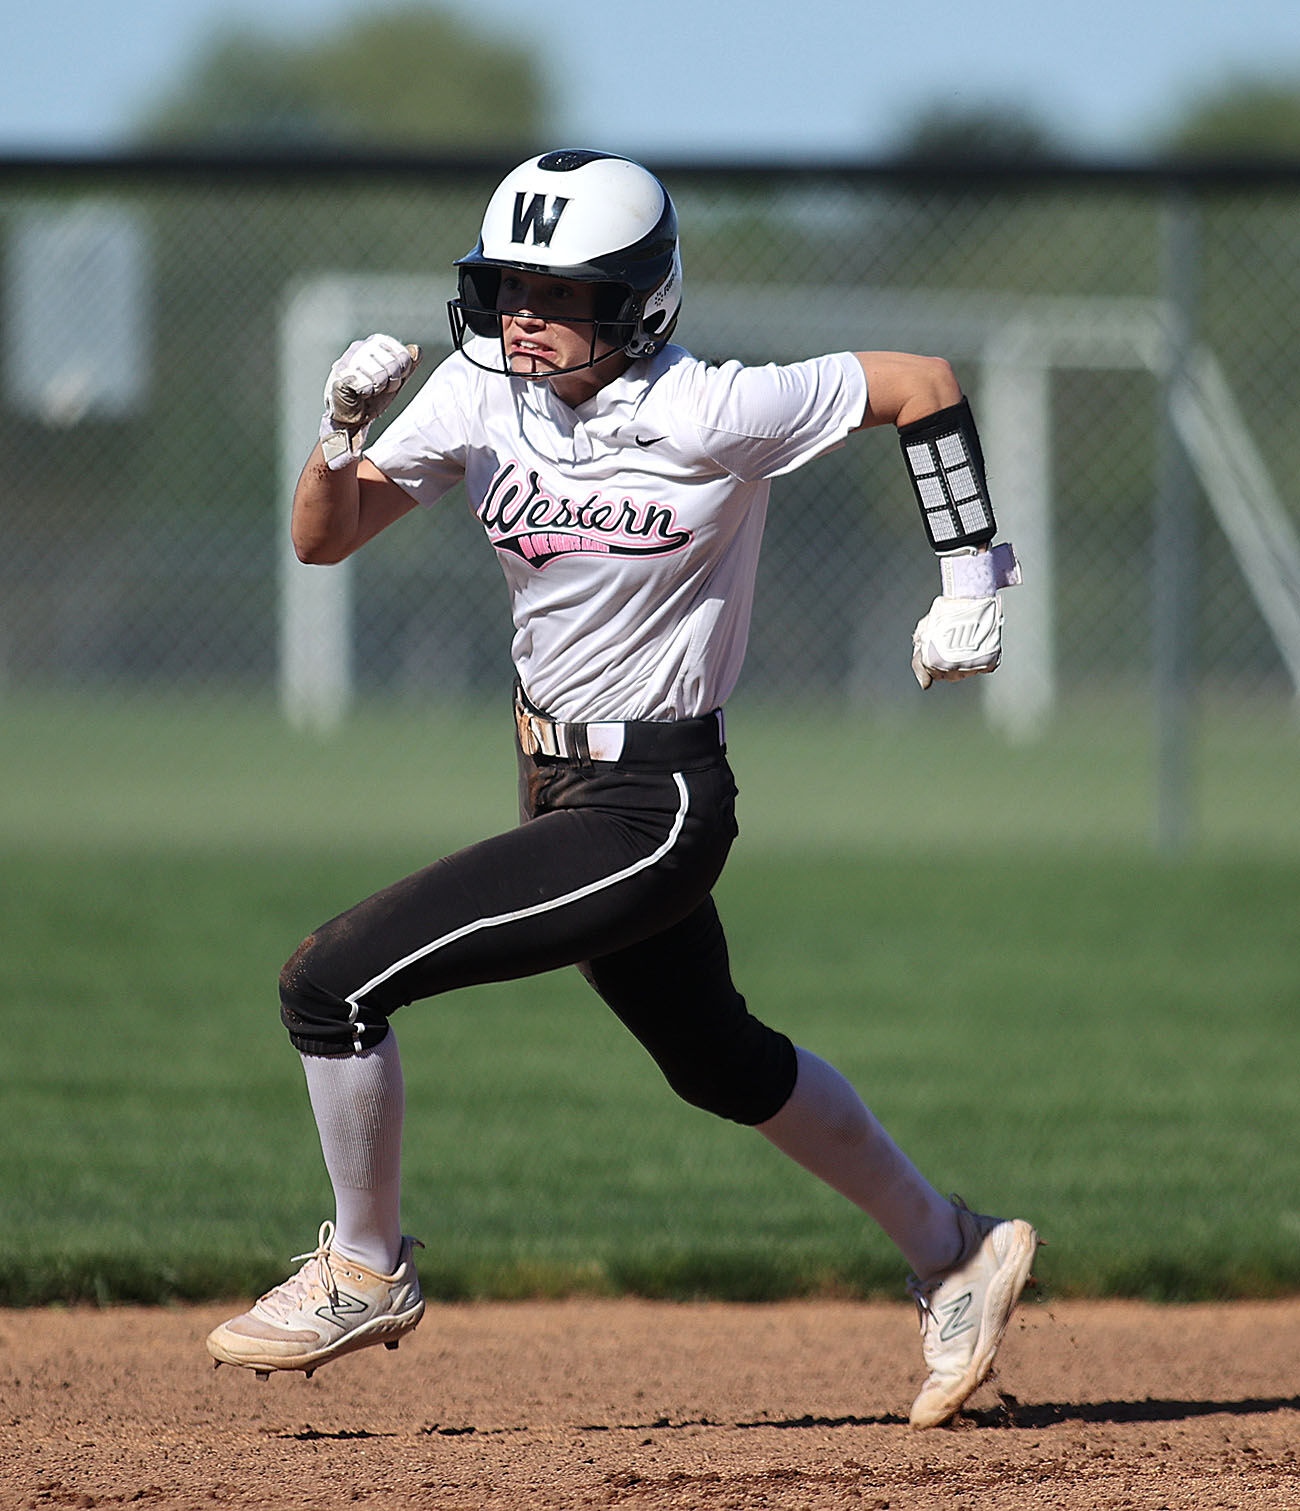 Tuesday Prep Roundup: Western Softball Dominates, Logansport Wins, and Tipton Shuts Out Seeger